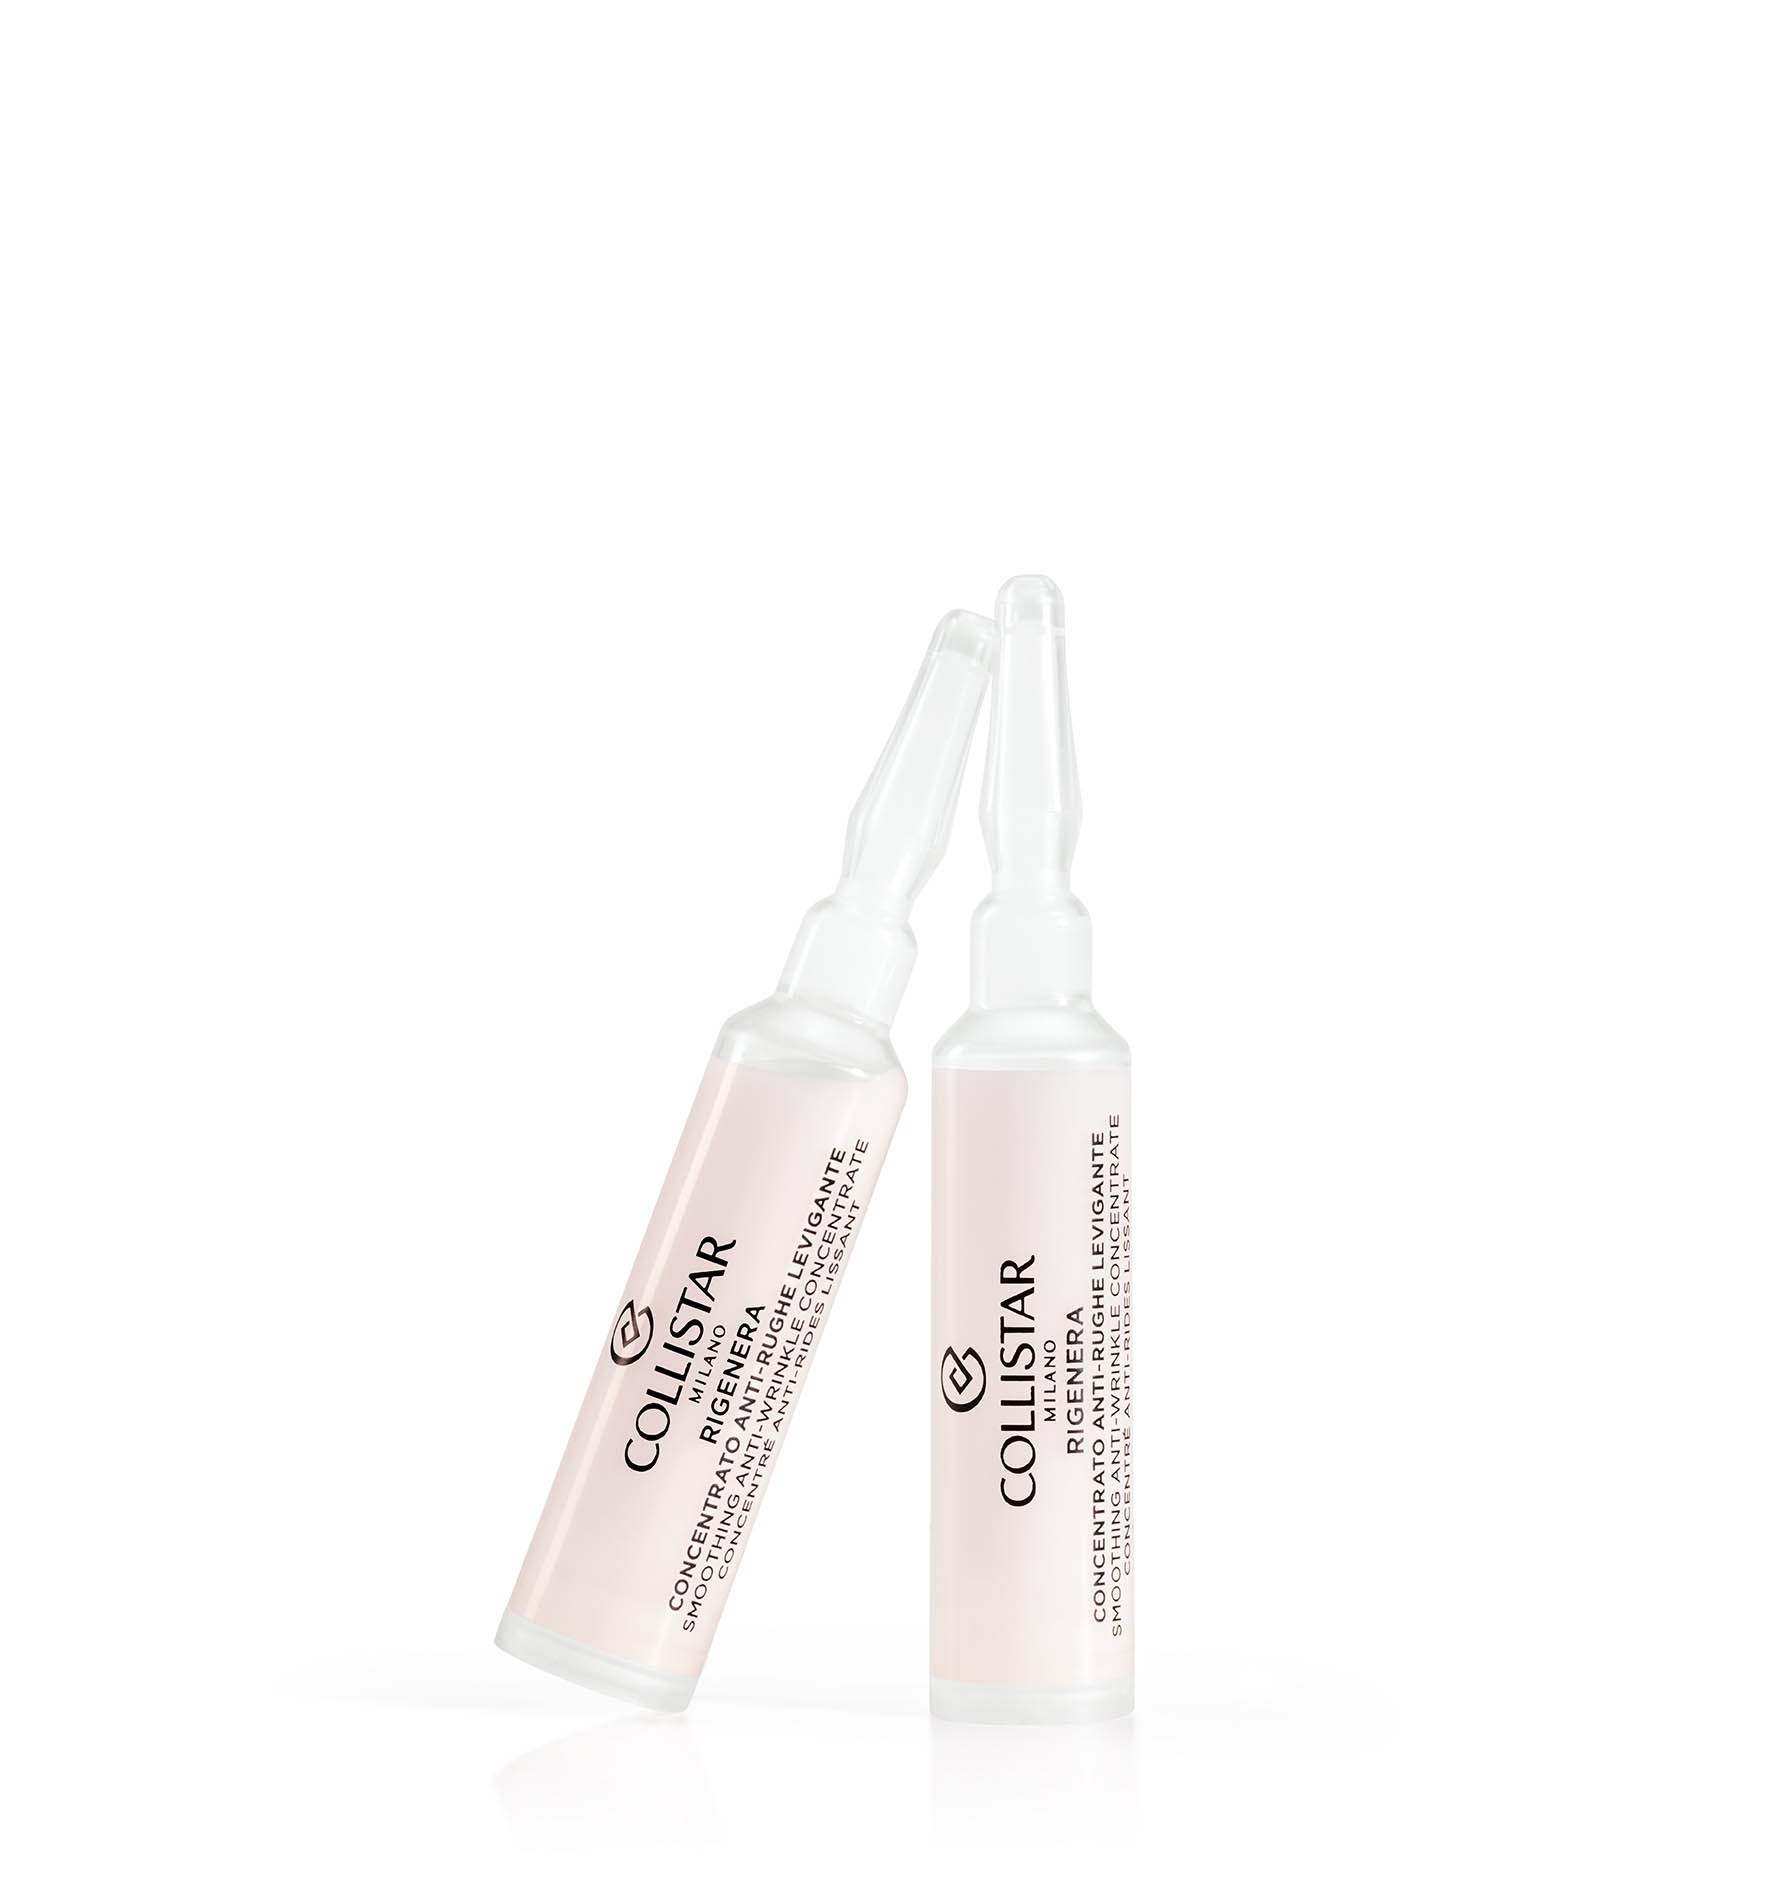 RIGENERA SMOOTHING ANTI-WRINKLE
CONCENTRATE - New | Collistar - Shop Online Ufficiale